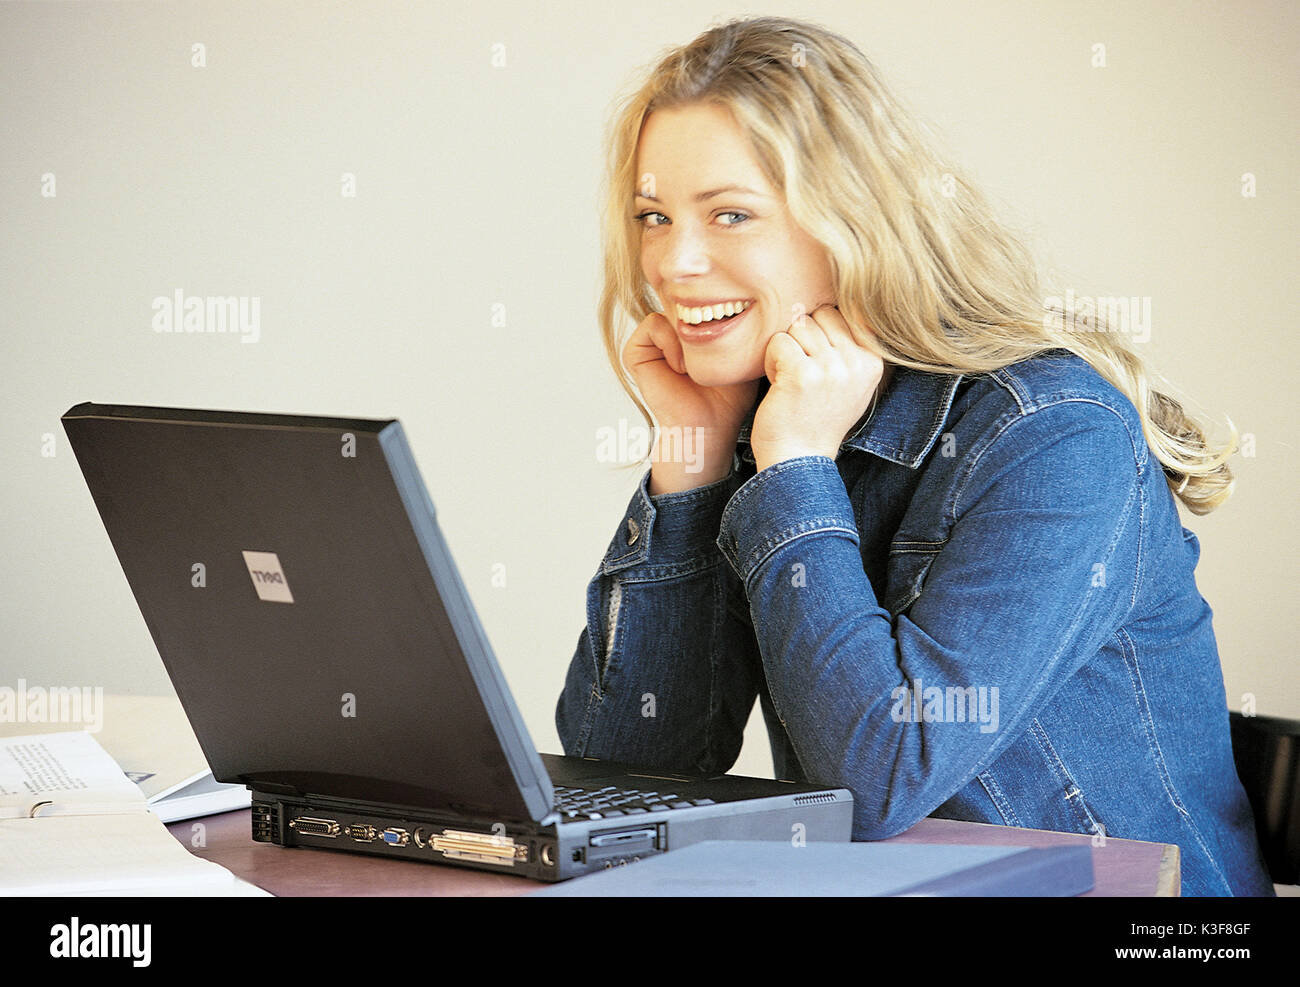 Laughing young woman with the laptop Stock Photo